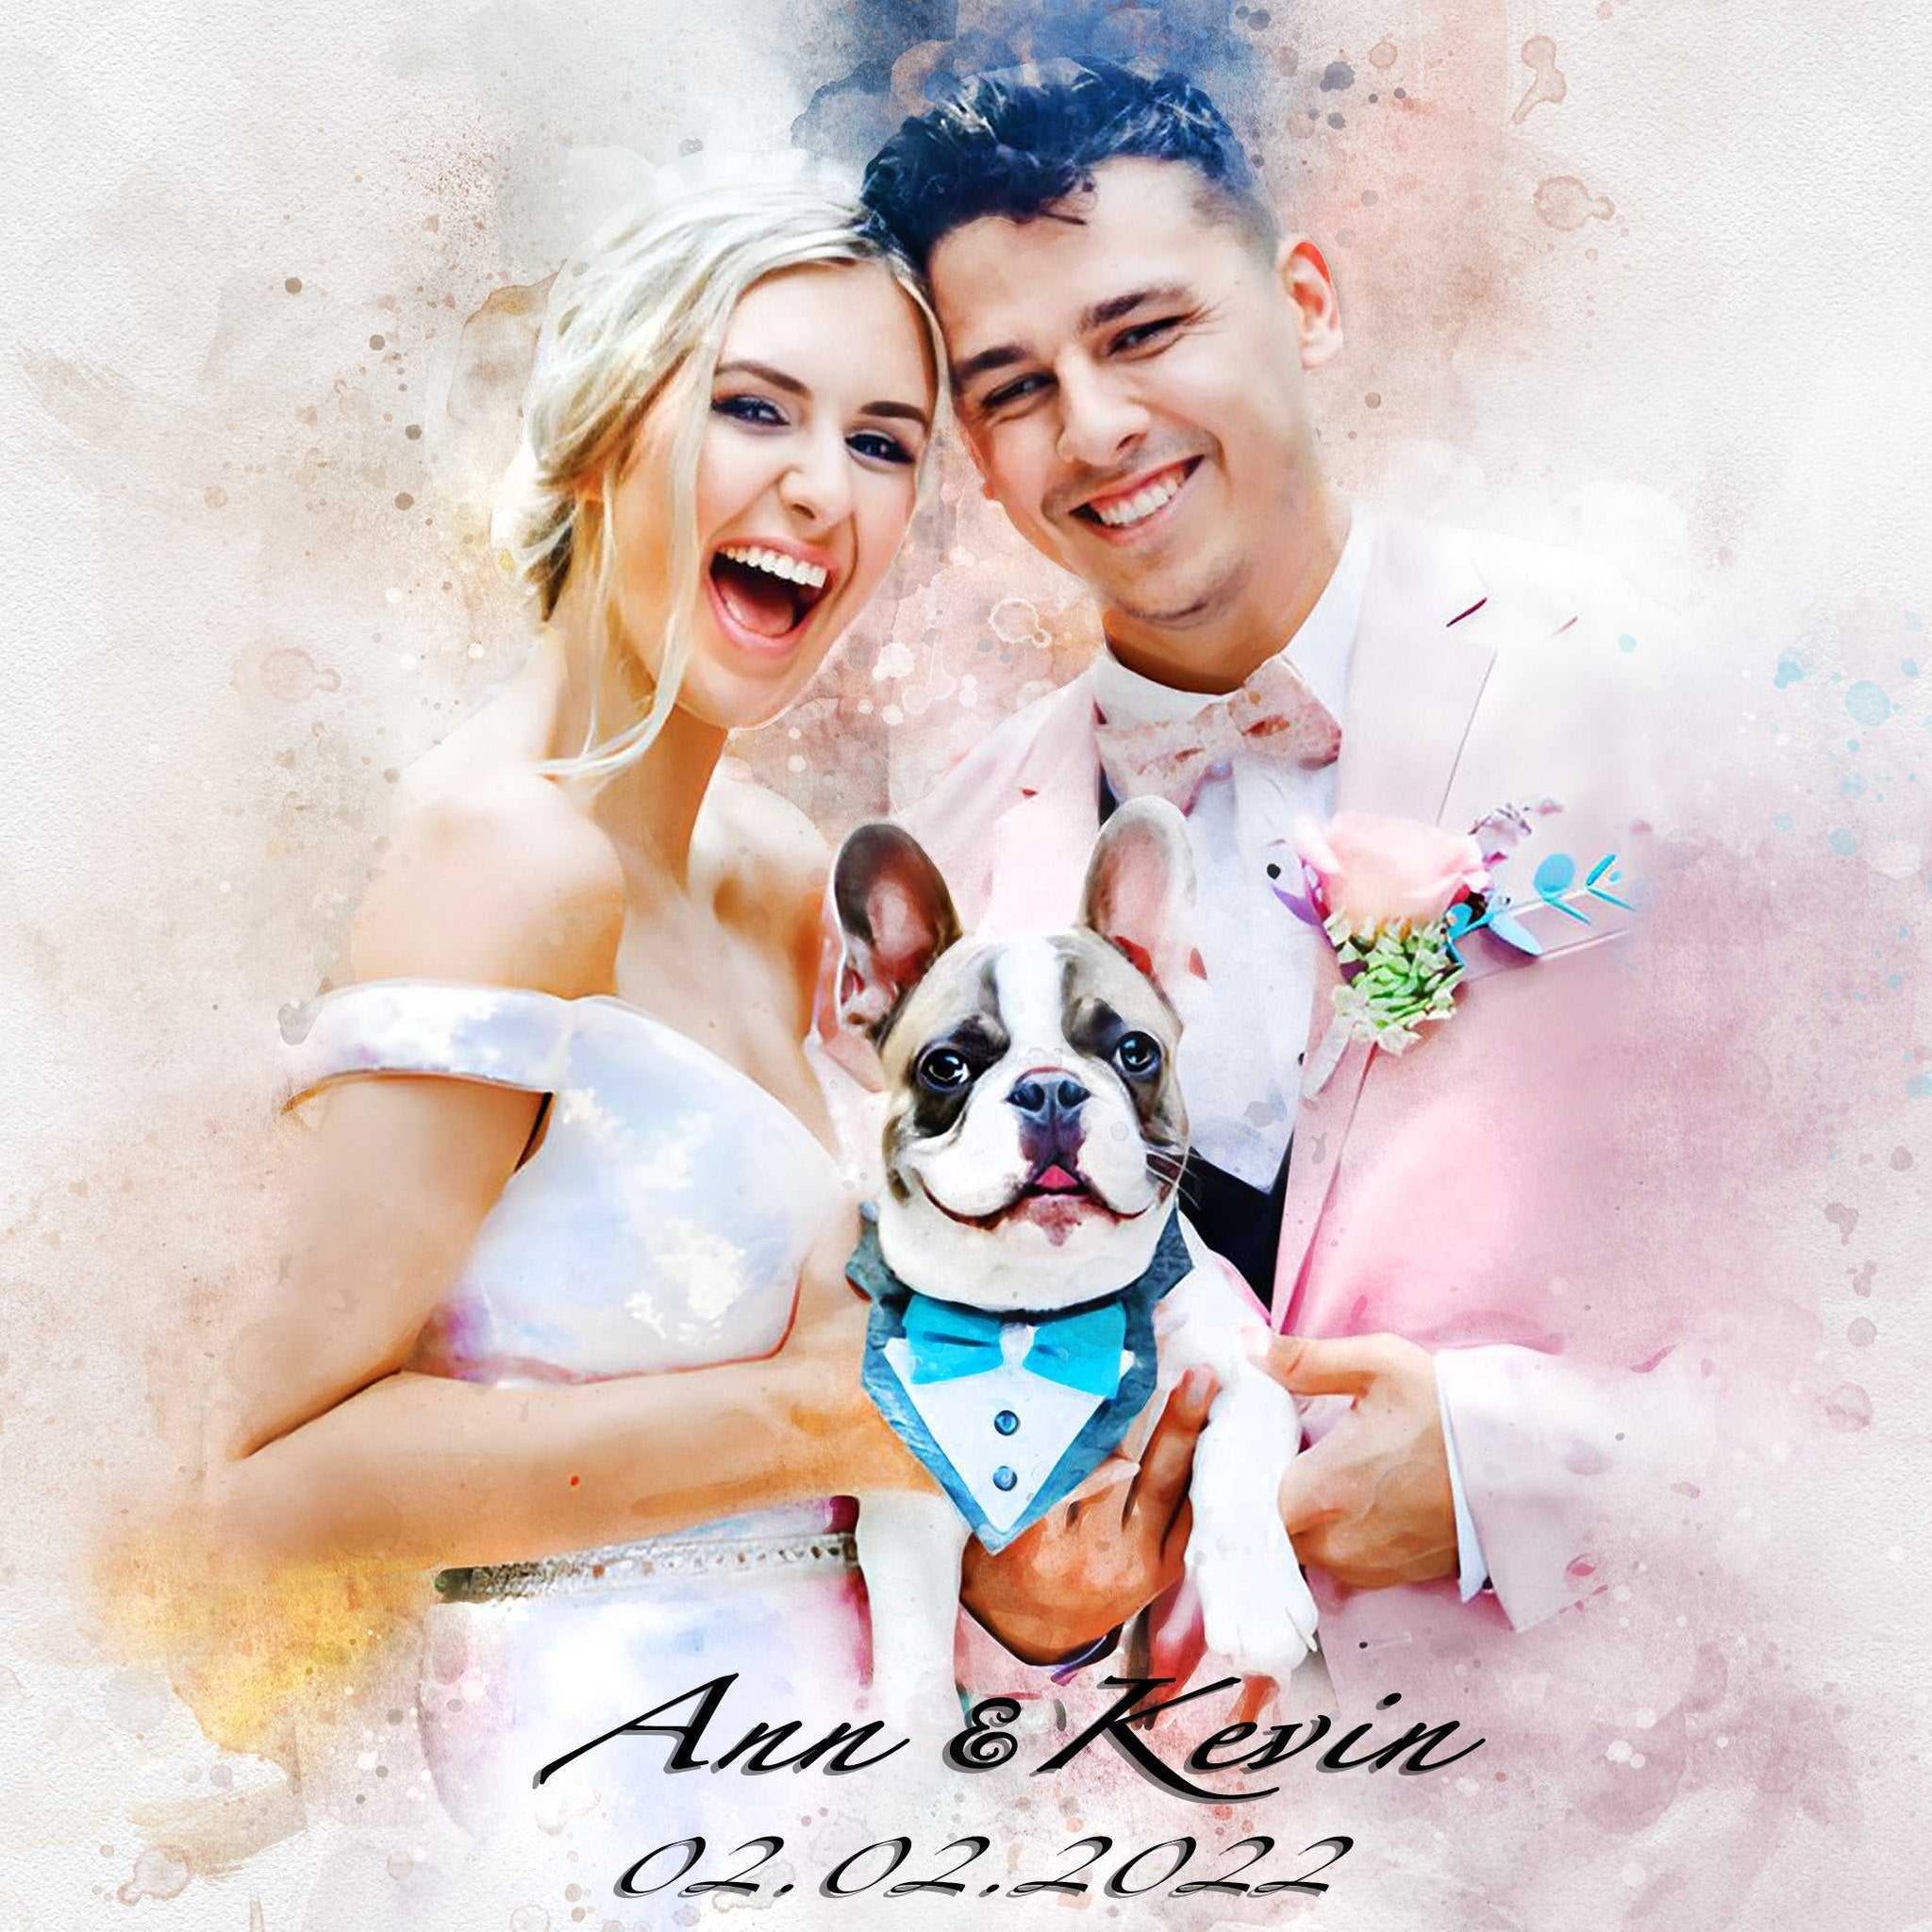 Custom Portrait Paintings | Personalized Wedding Painting - FromPicToArt